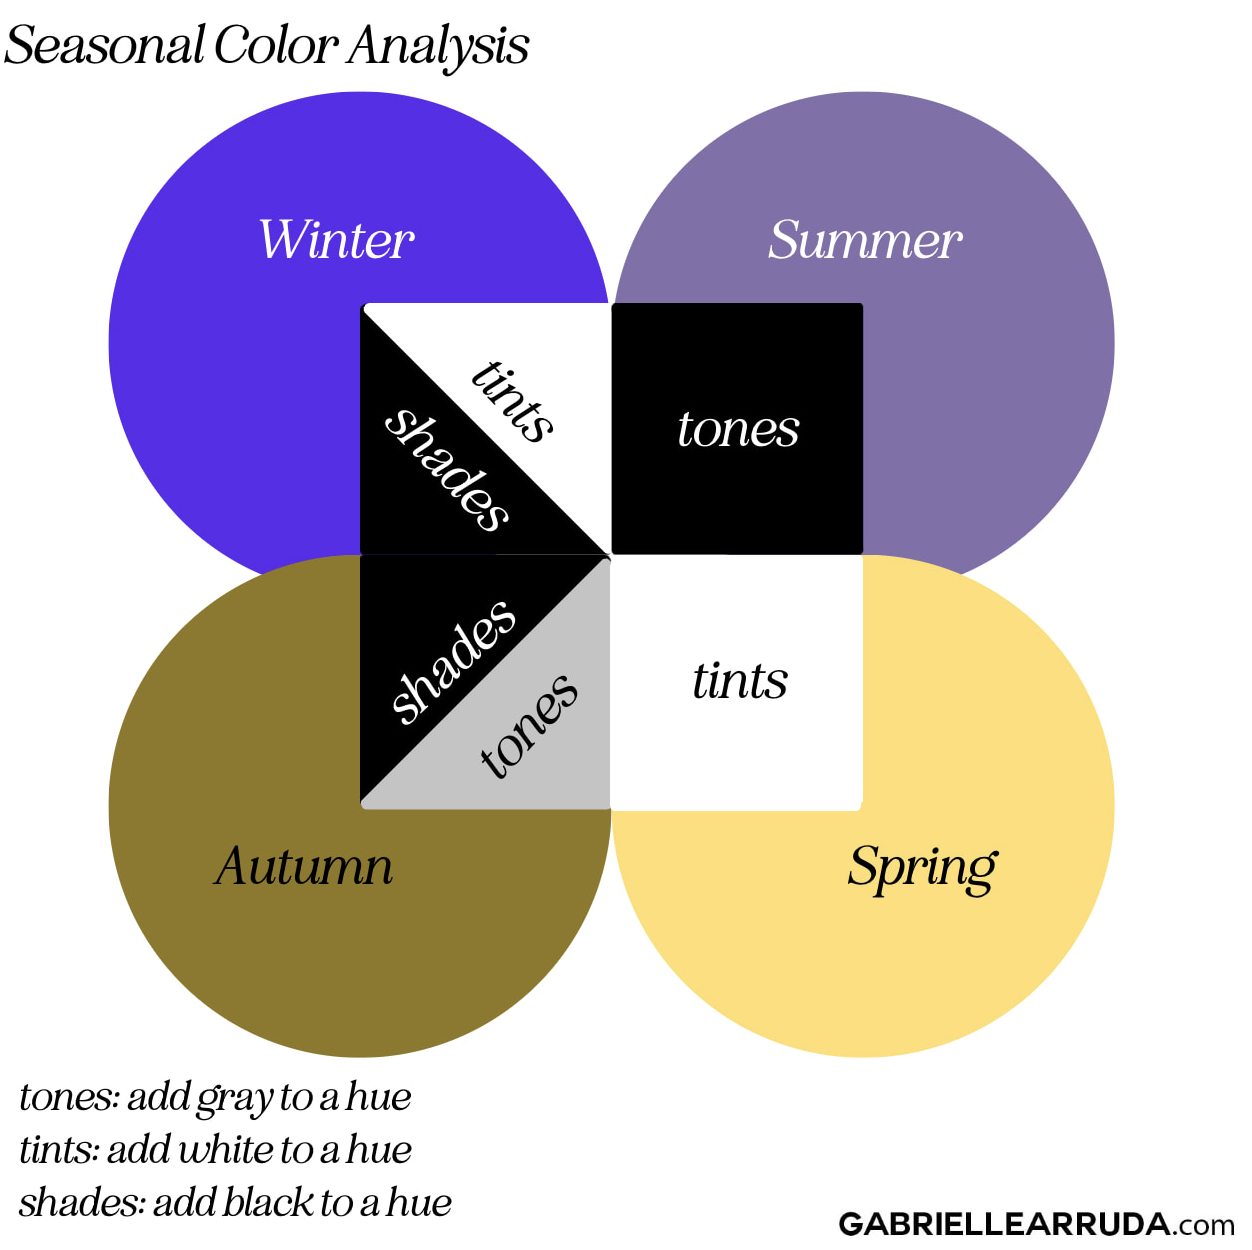 Colour season analysis: how a younger generation warmed to 80s